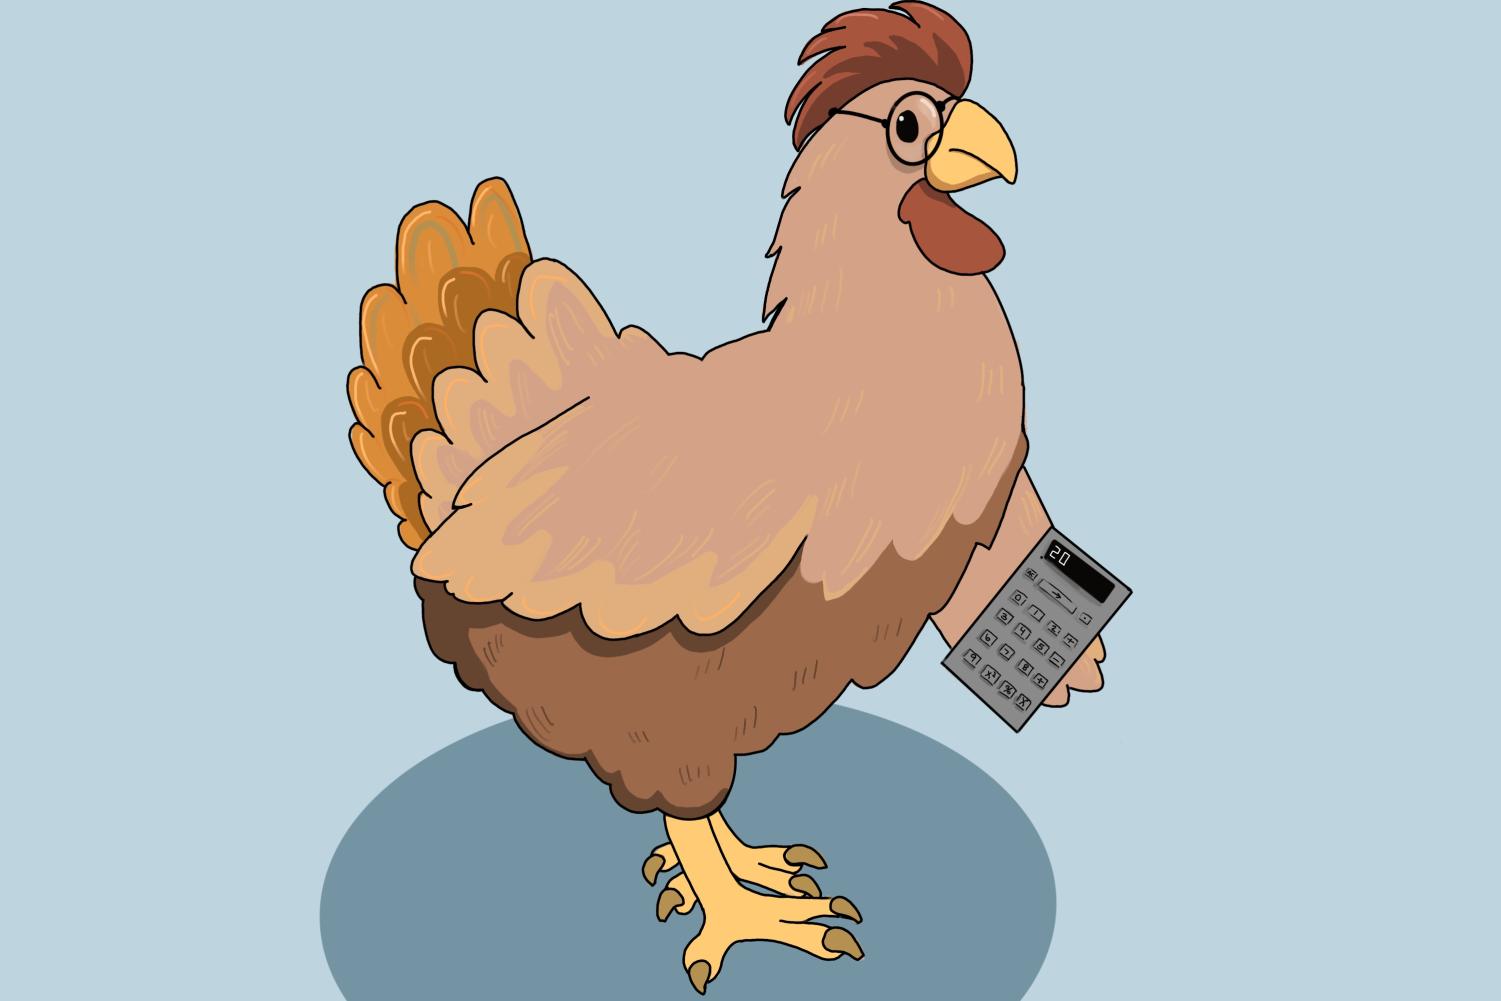 An+illustration+of+a+rooster+with+glasses+holding+a+calculator+on+a+blue+background.